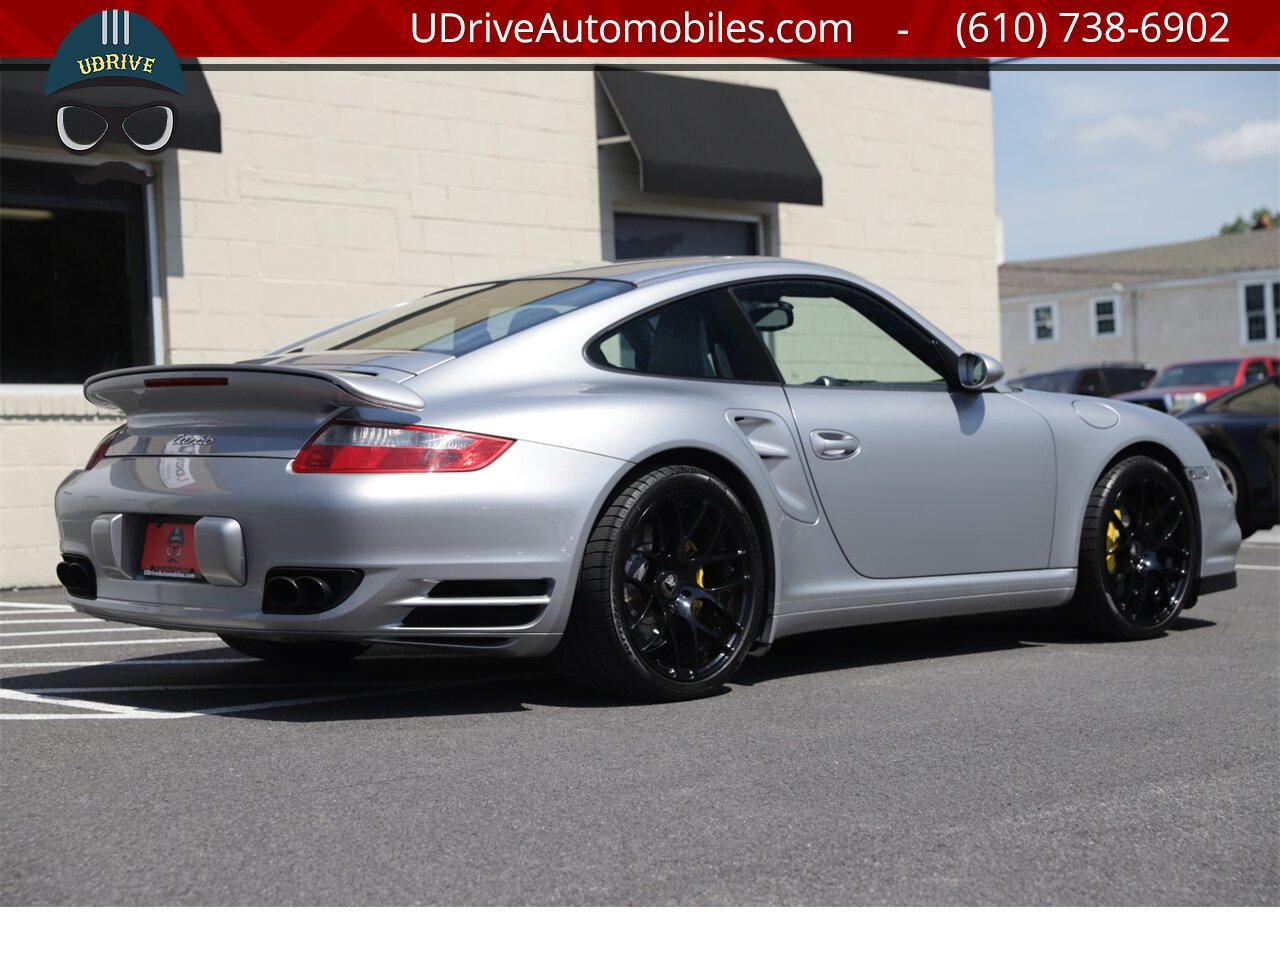 2008 Porsche 911 6 Speed Manual Turbo 997 PCCB's $149k MSRP   - Photo 18 - West Chester, PA 19382